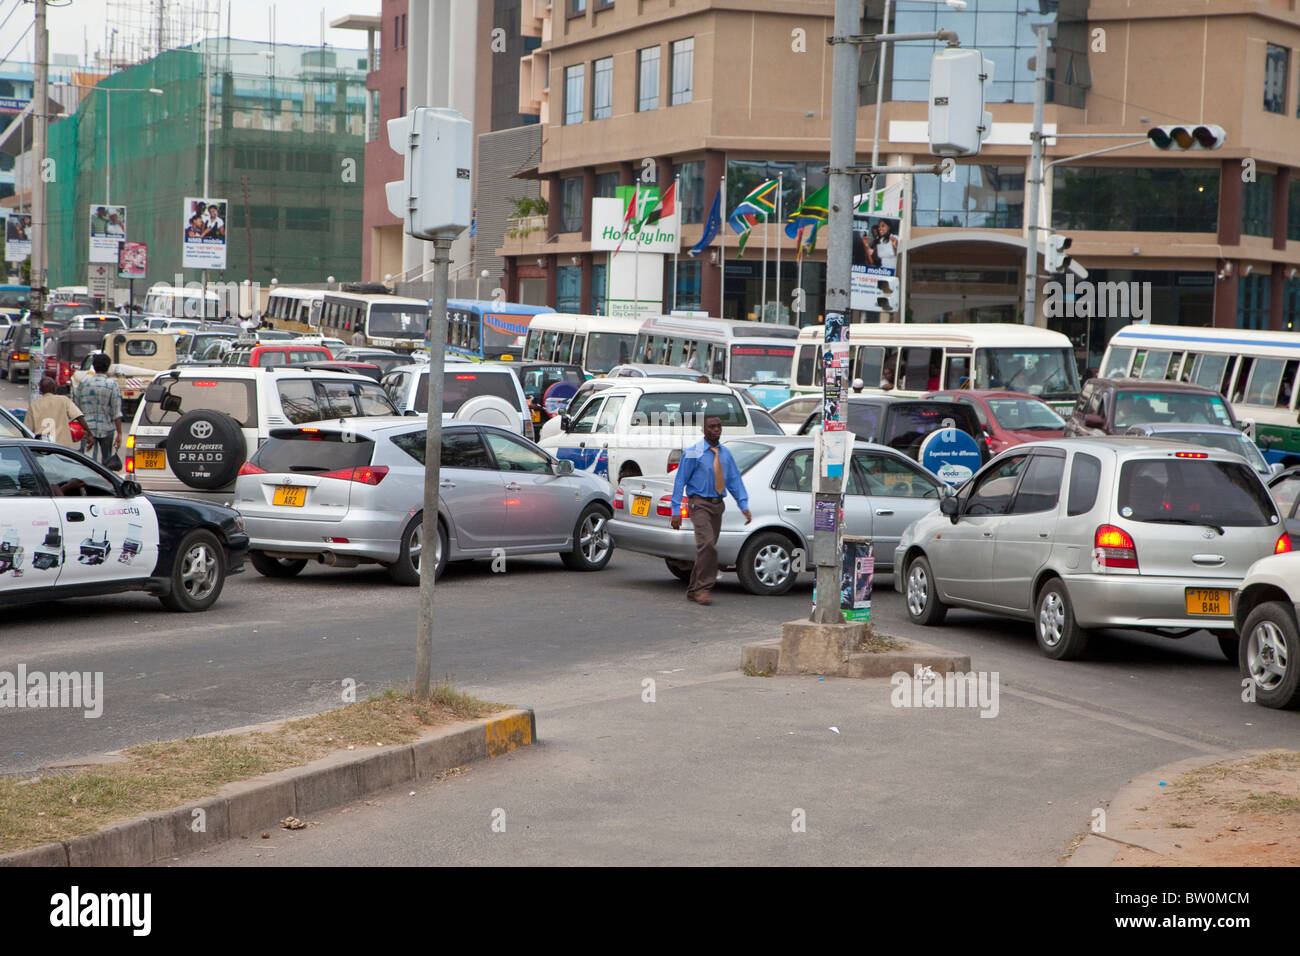 Dar es Salaam, Tanzania. Traffic at Intersection of India and Azikiwe Streets, in front of the Holiday Inn. Stock Photo